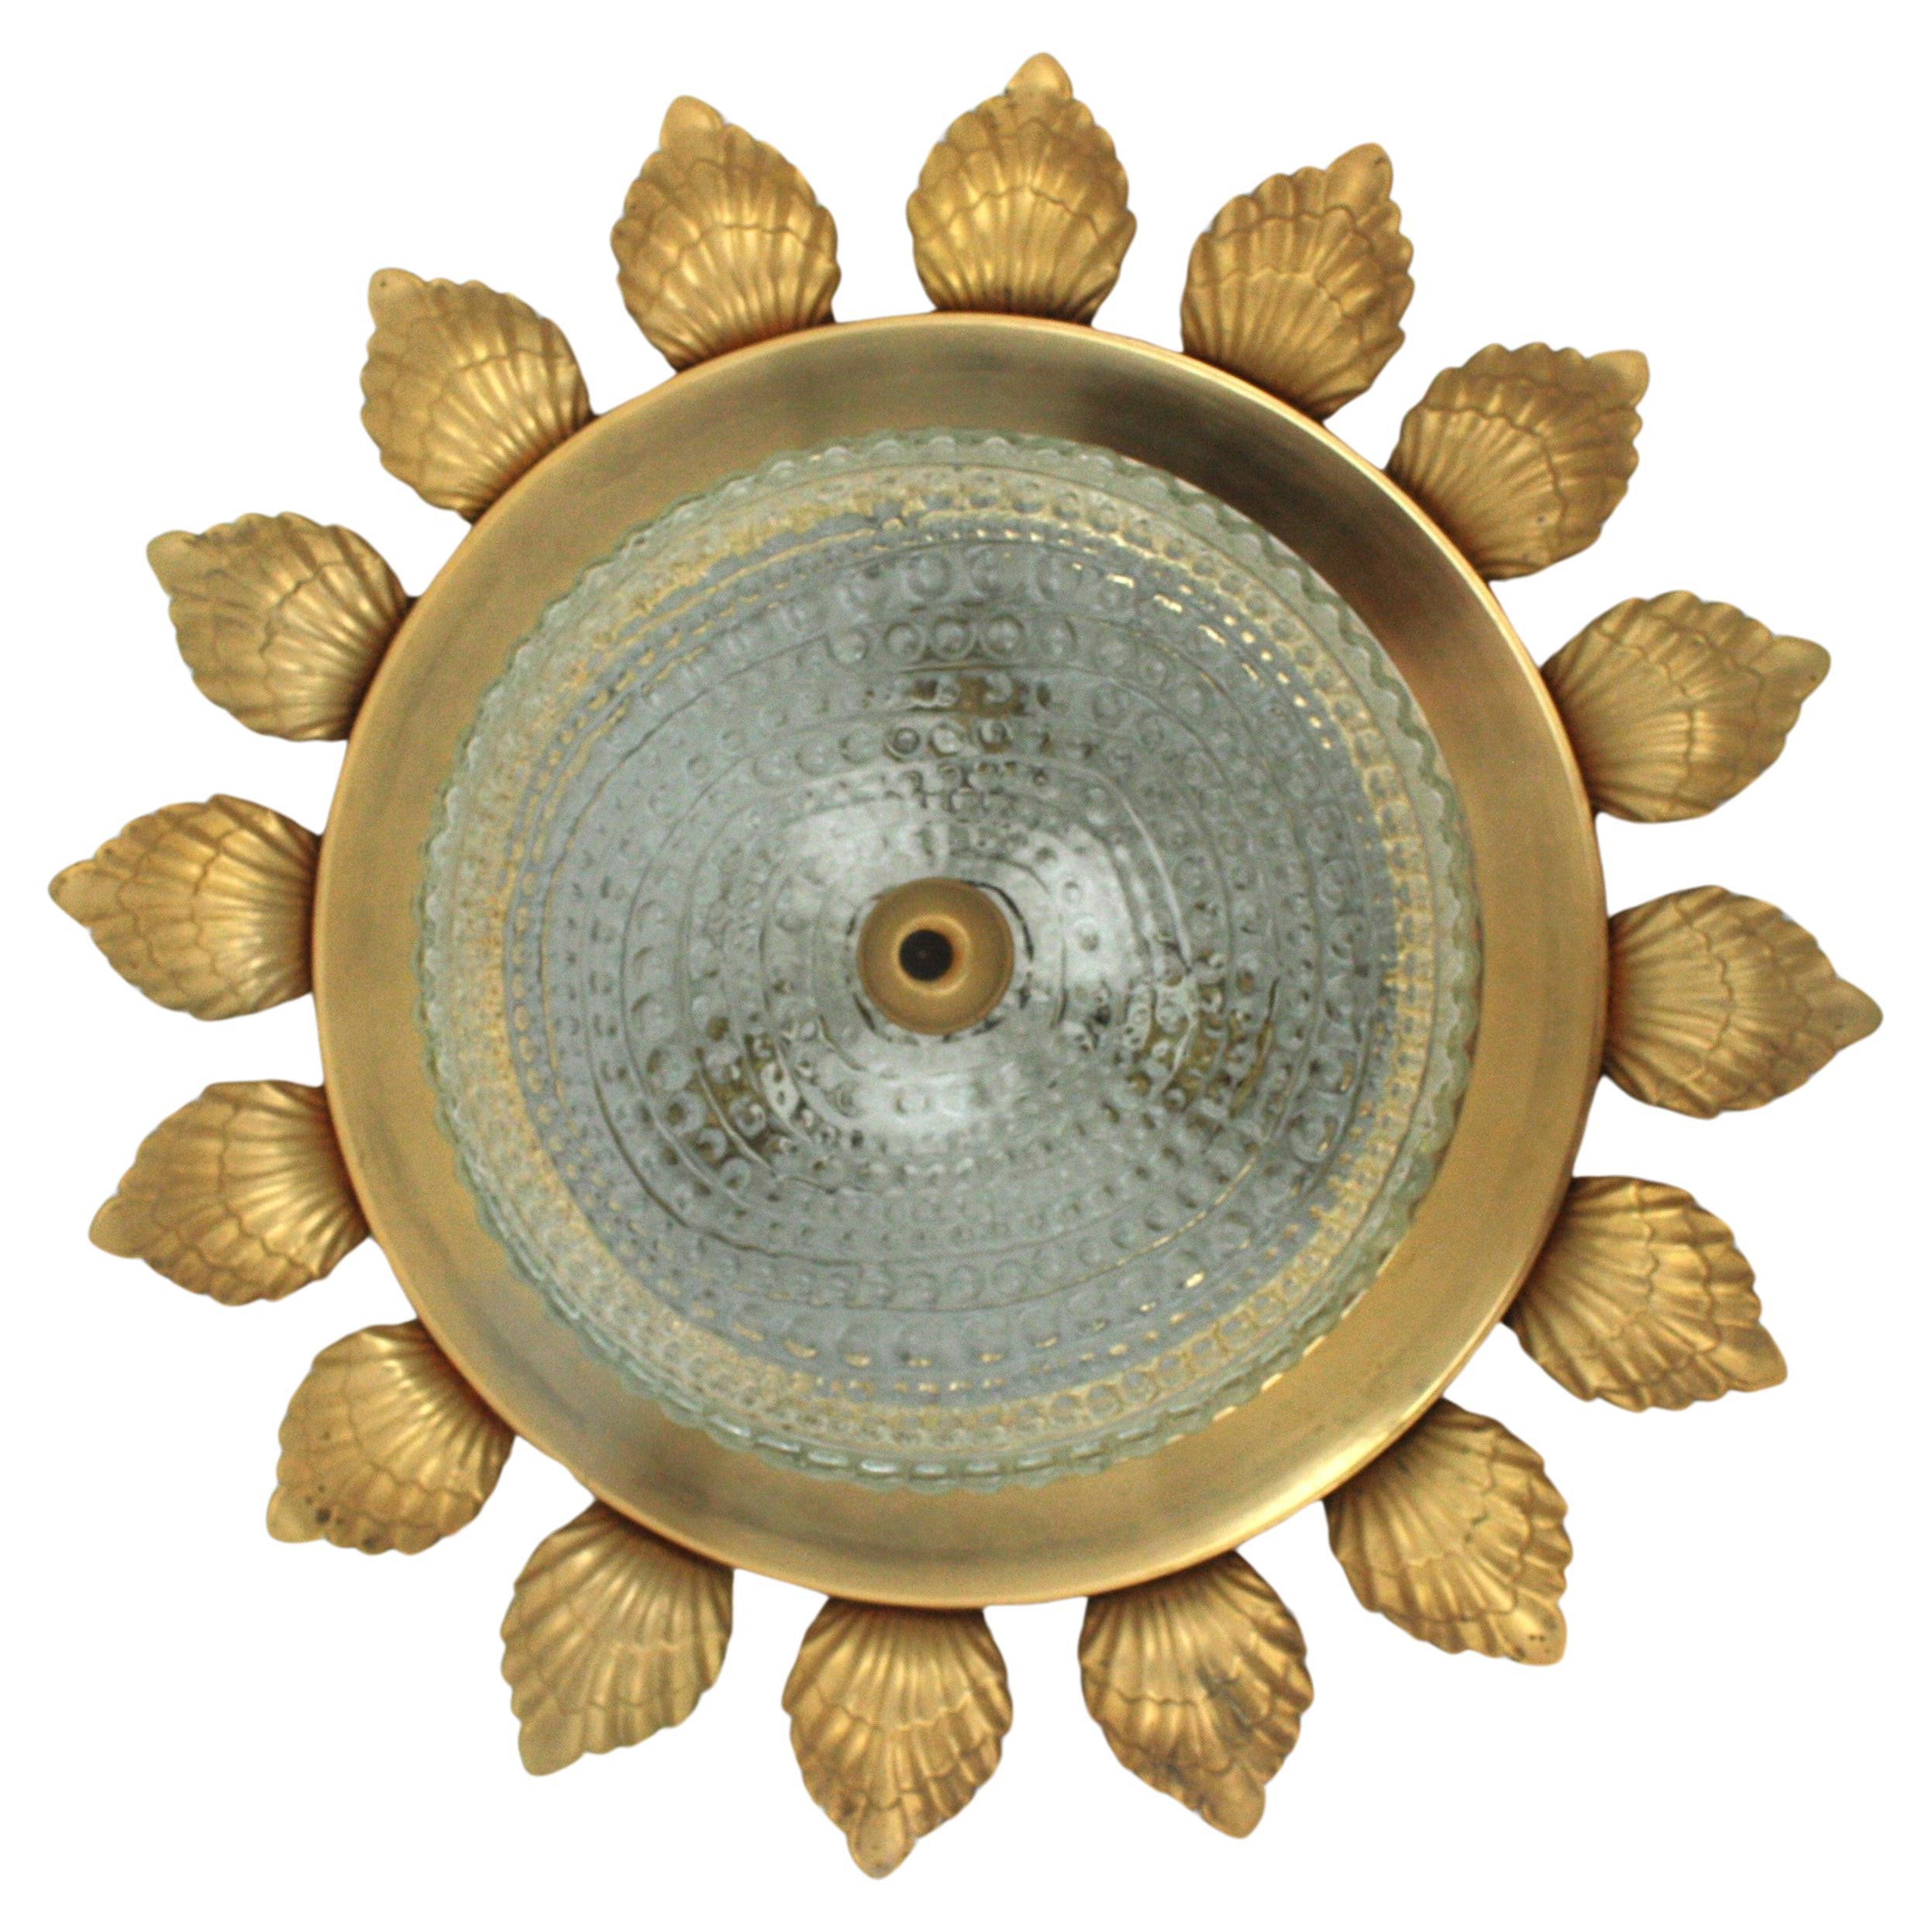 Flower shaped flush mount, Gilt Metal, Pressed Glass, Spain, 1960s.
This large ceiling lamp features a gilt metal flower shaped frame surrounding a central pressed glass shade with bubble pattern thorough.
It has a beautiful design combining